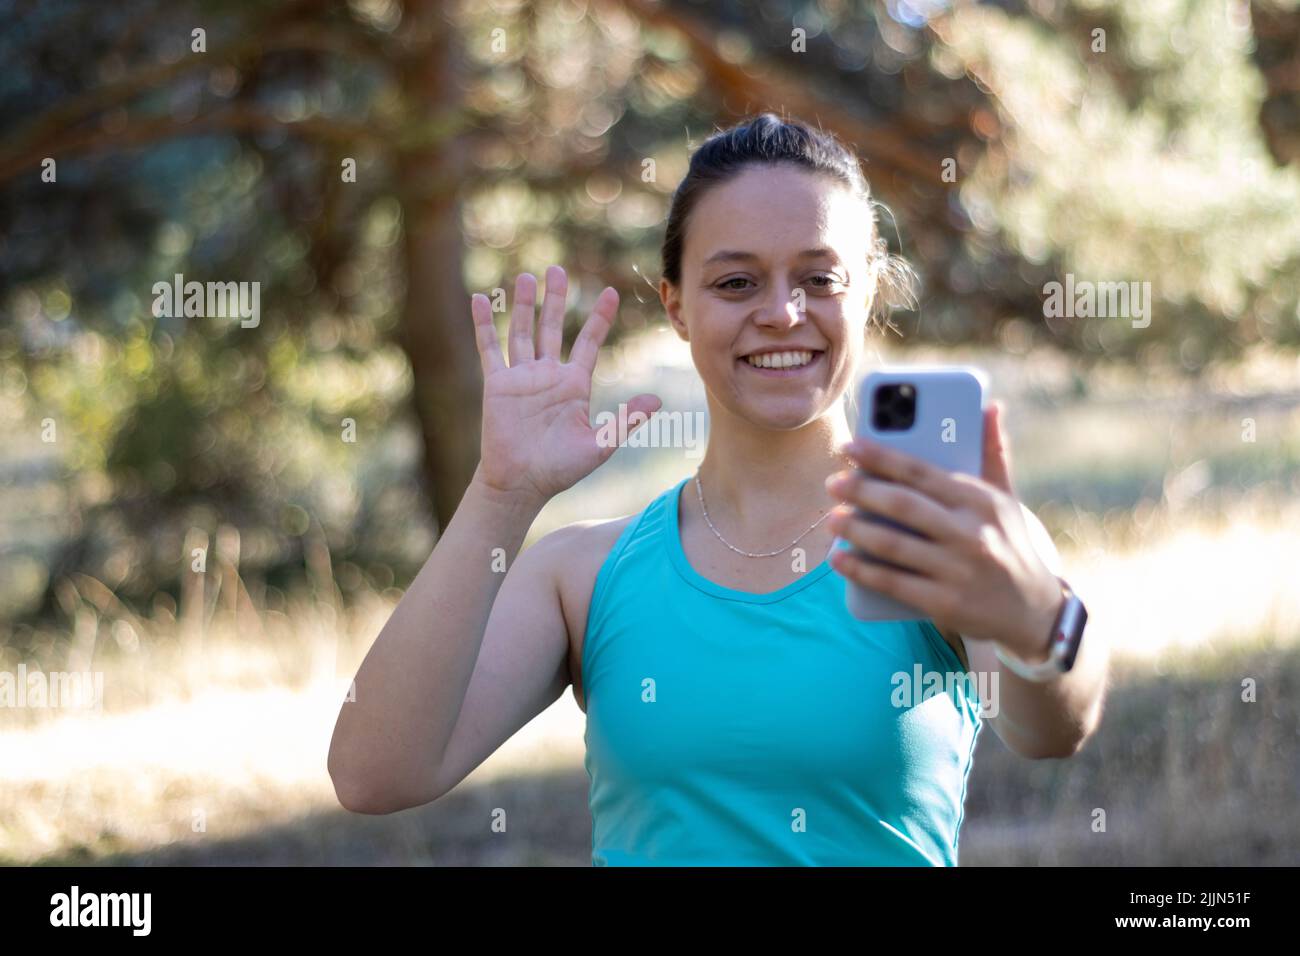 A smiling woman talking during a video call with a smartphone Stock Photo